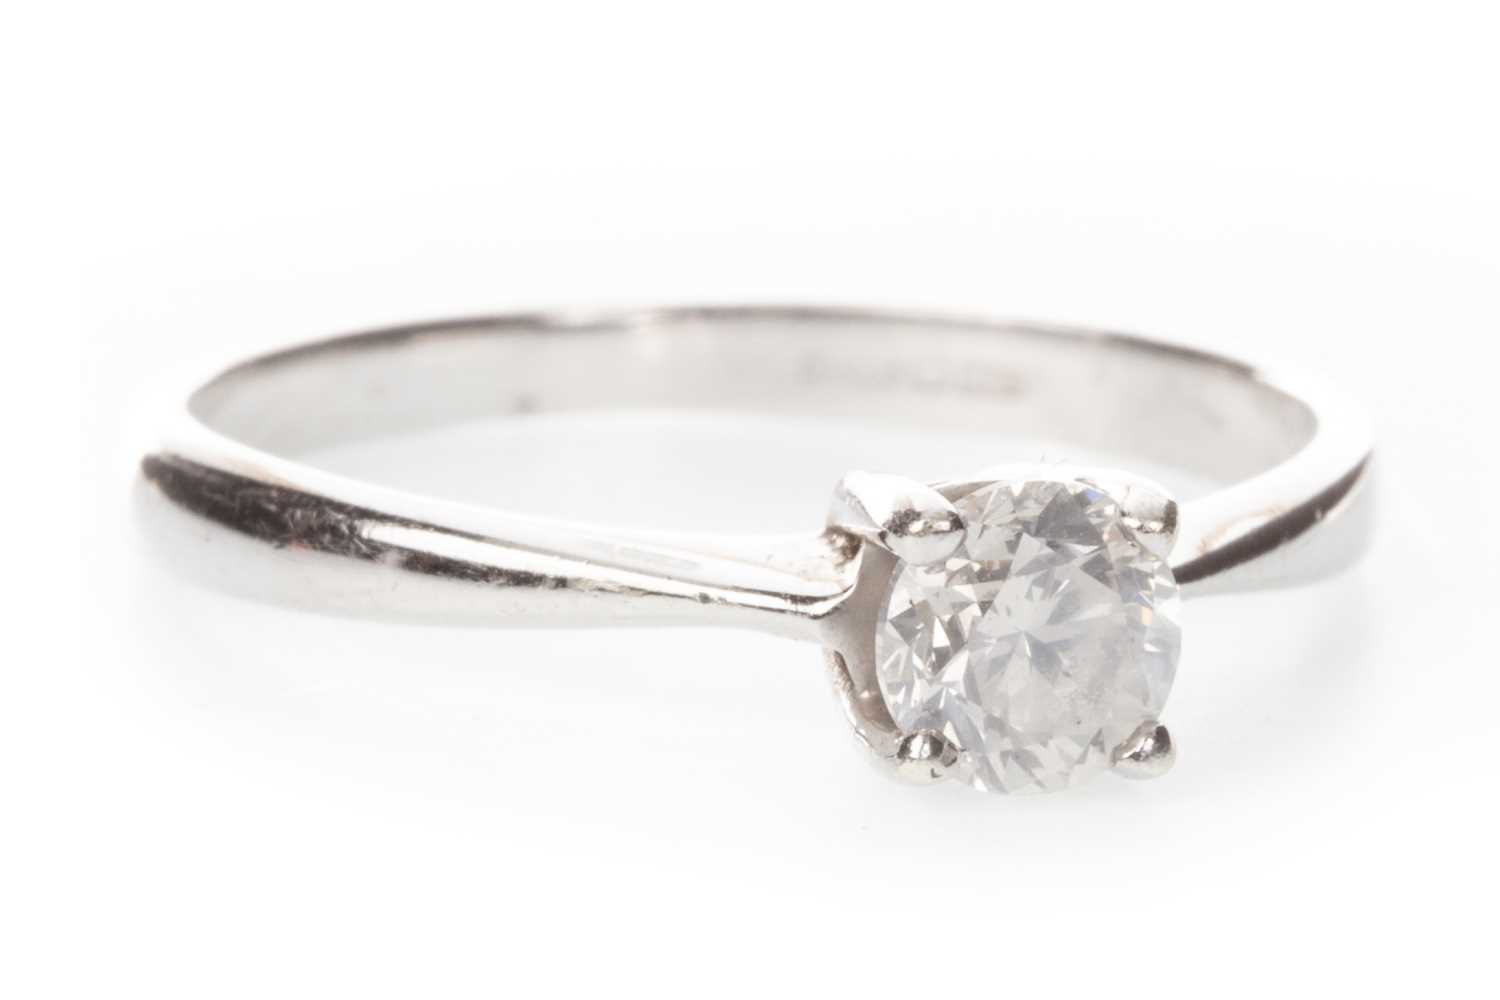 Lot 81 - A DIAMOND SOLITAIRE RING